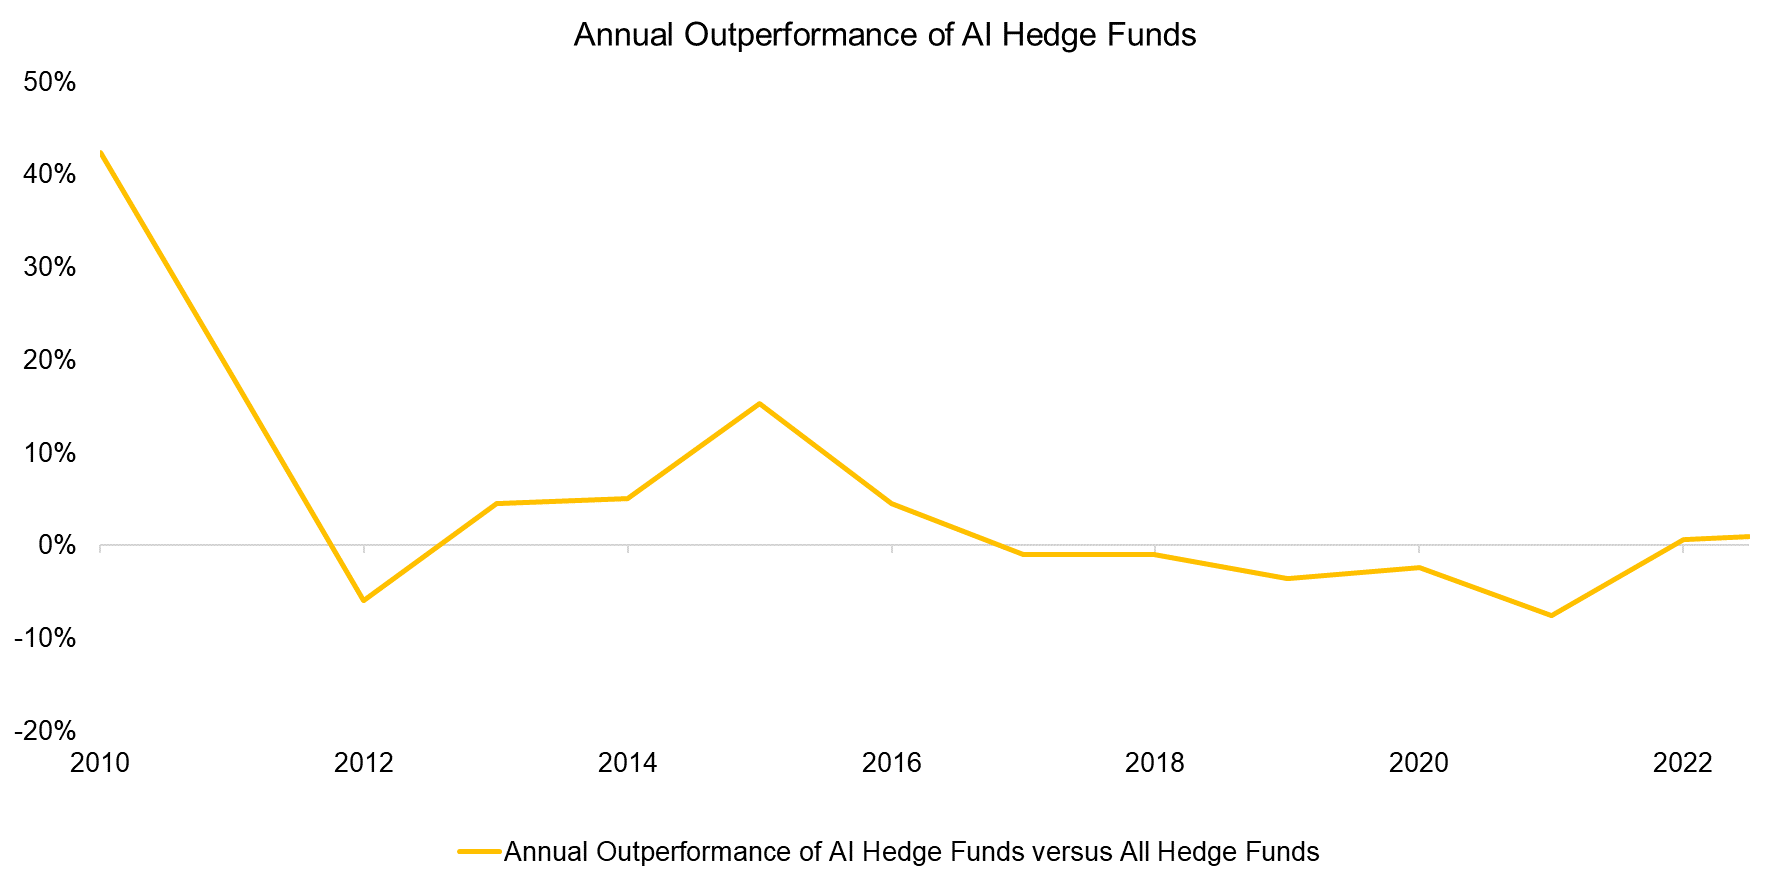 Annual Outperformance of AI Hedge Funds